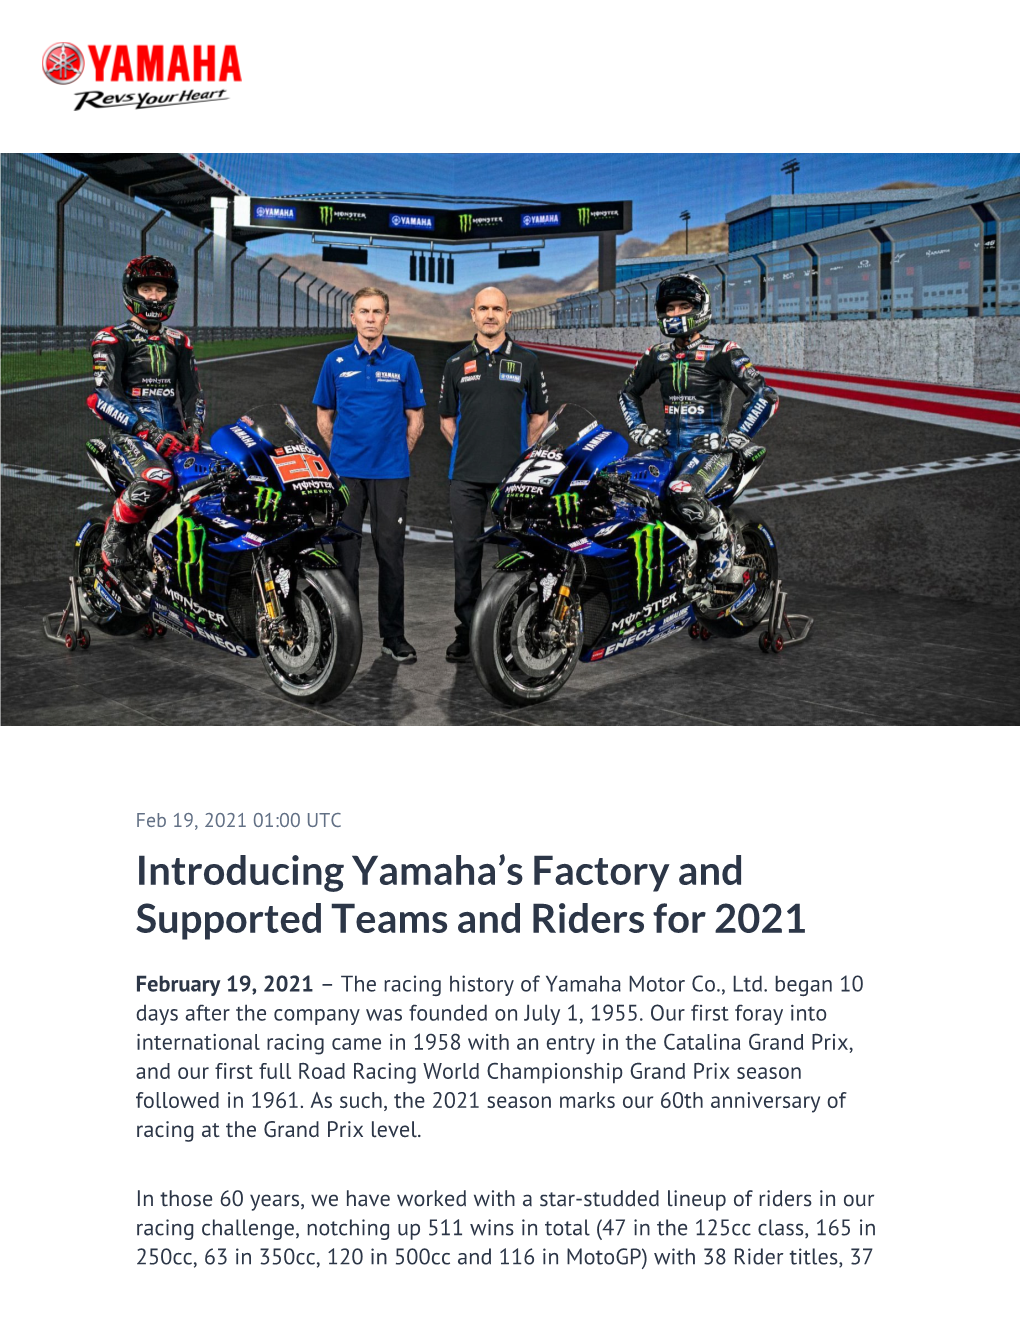 Introducing Yamaha's Factory and Supported Teams and Riders For